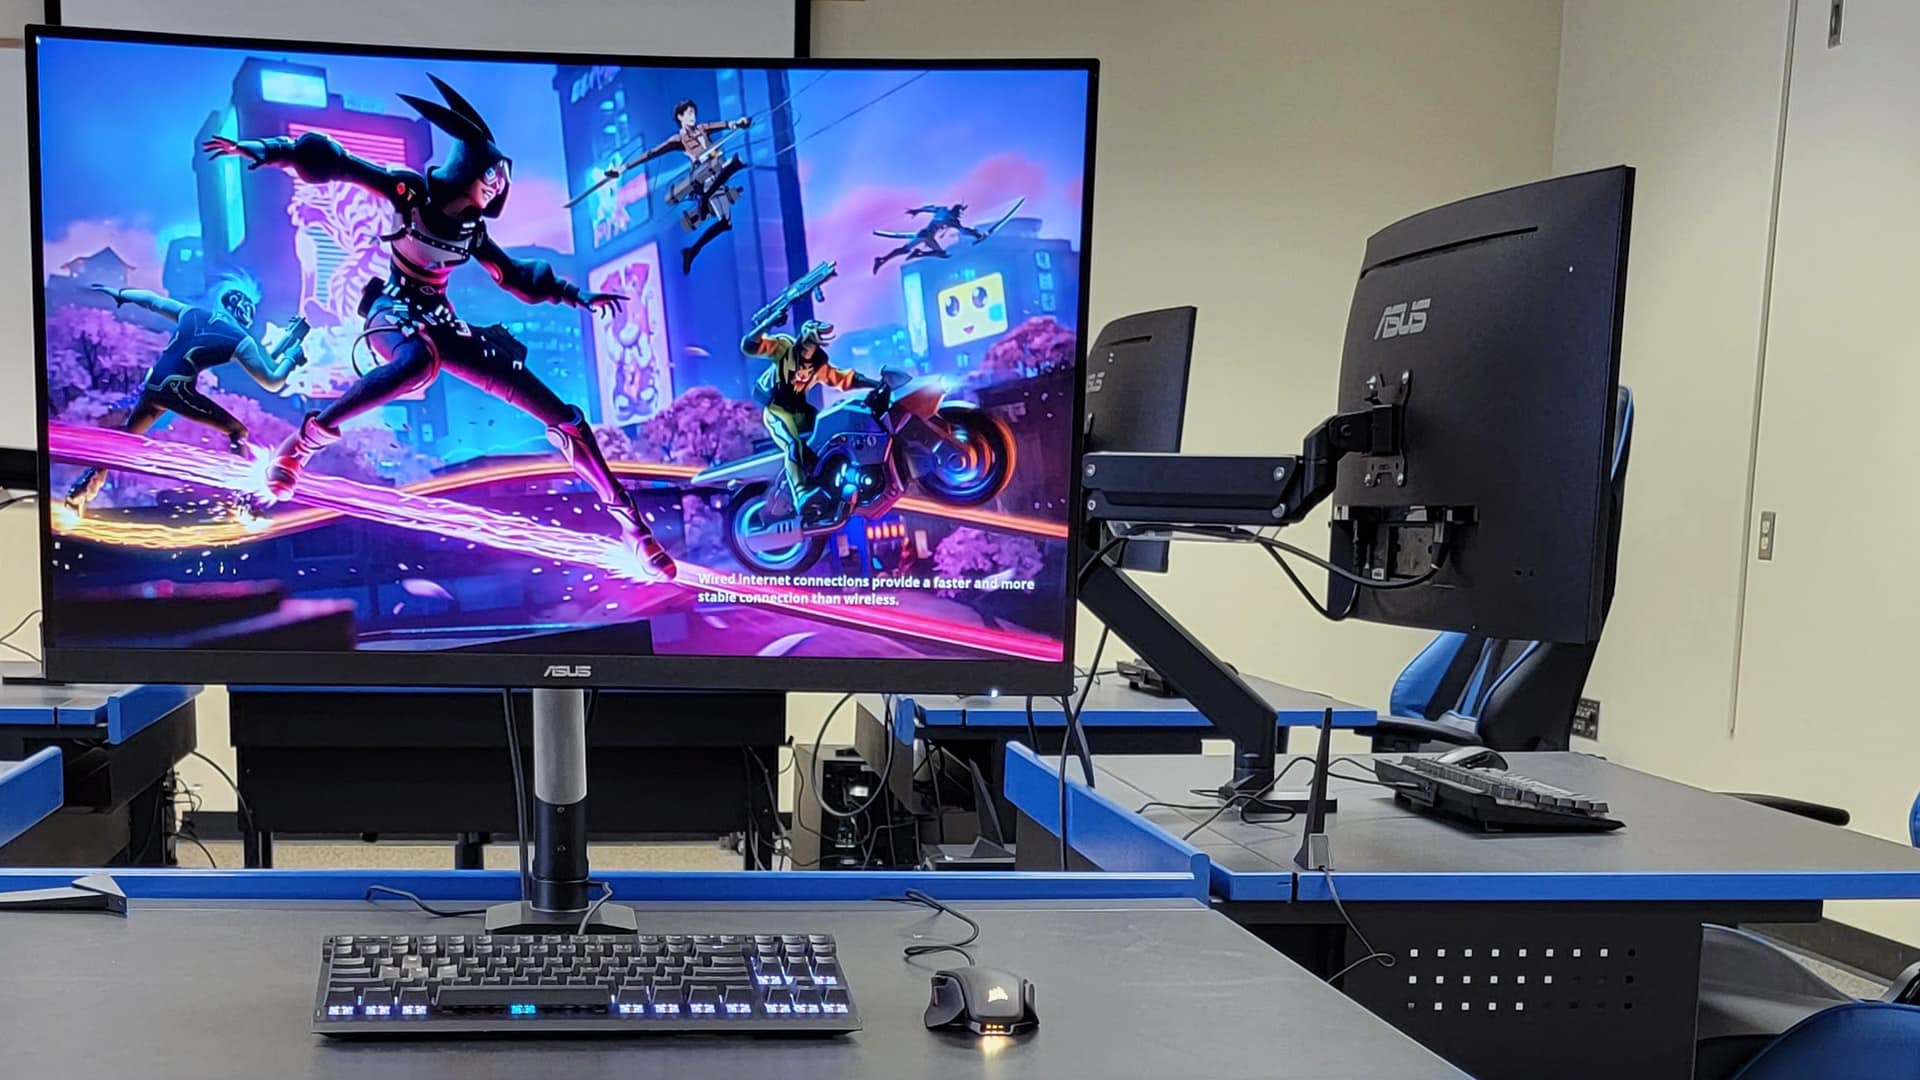 photo of one of the eSports Center's gaming computers with a game-inspired image displayed on the screen